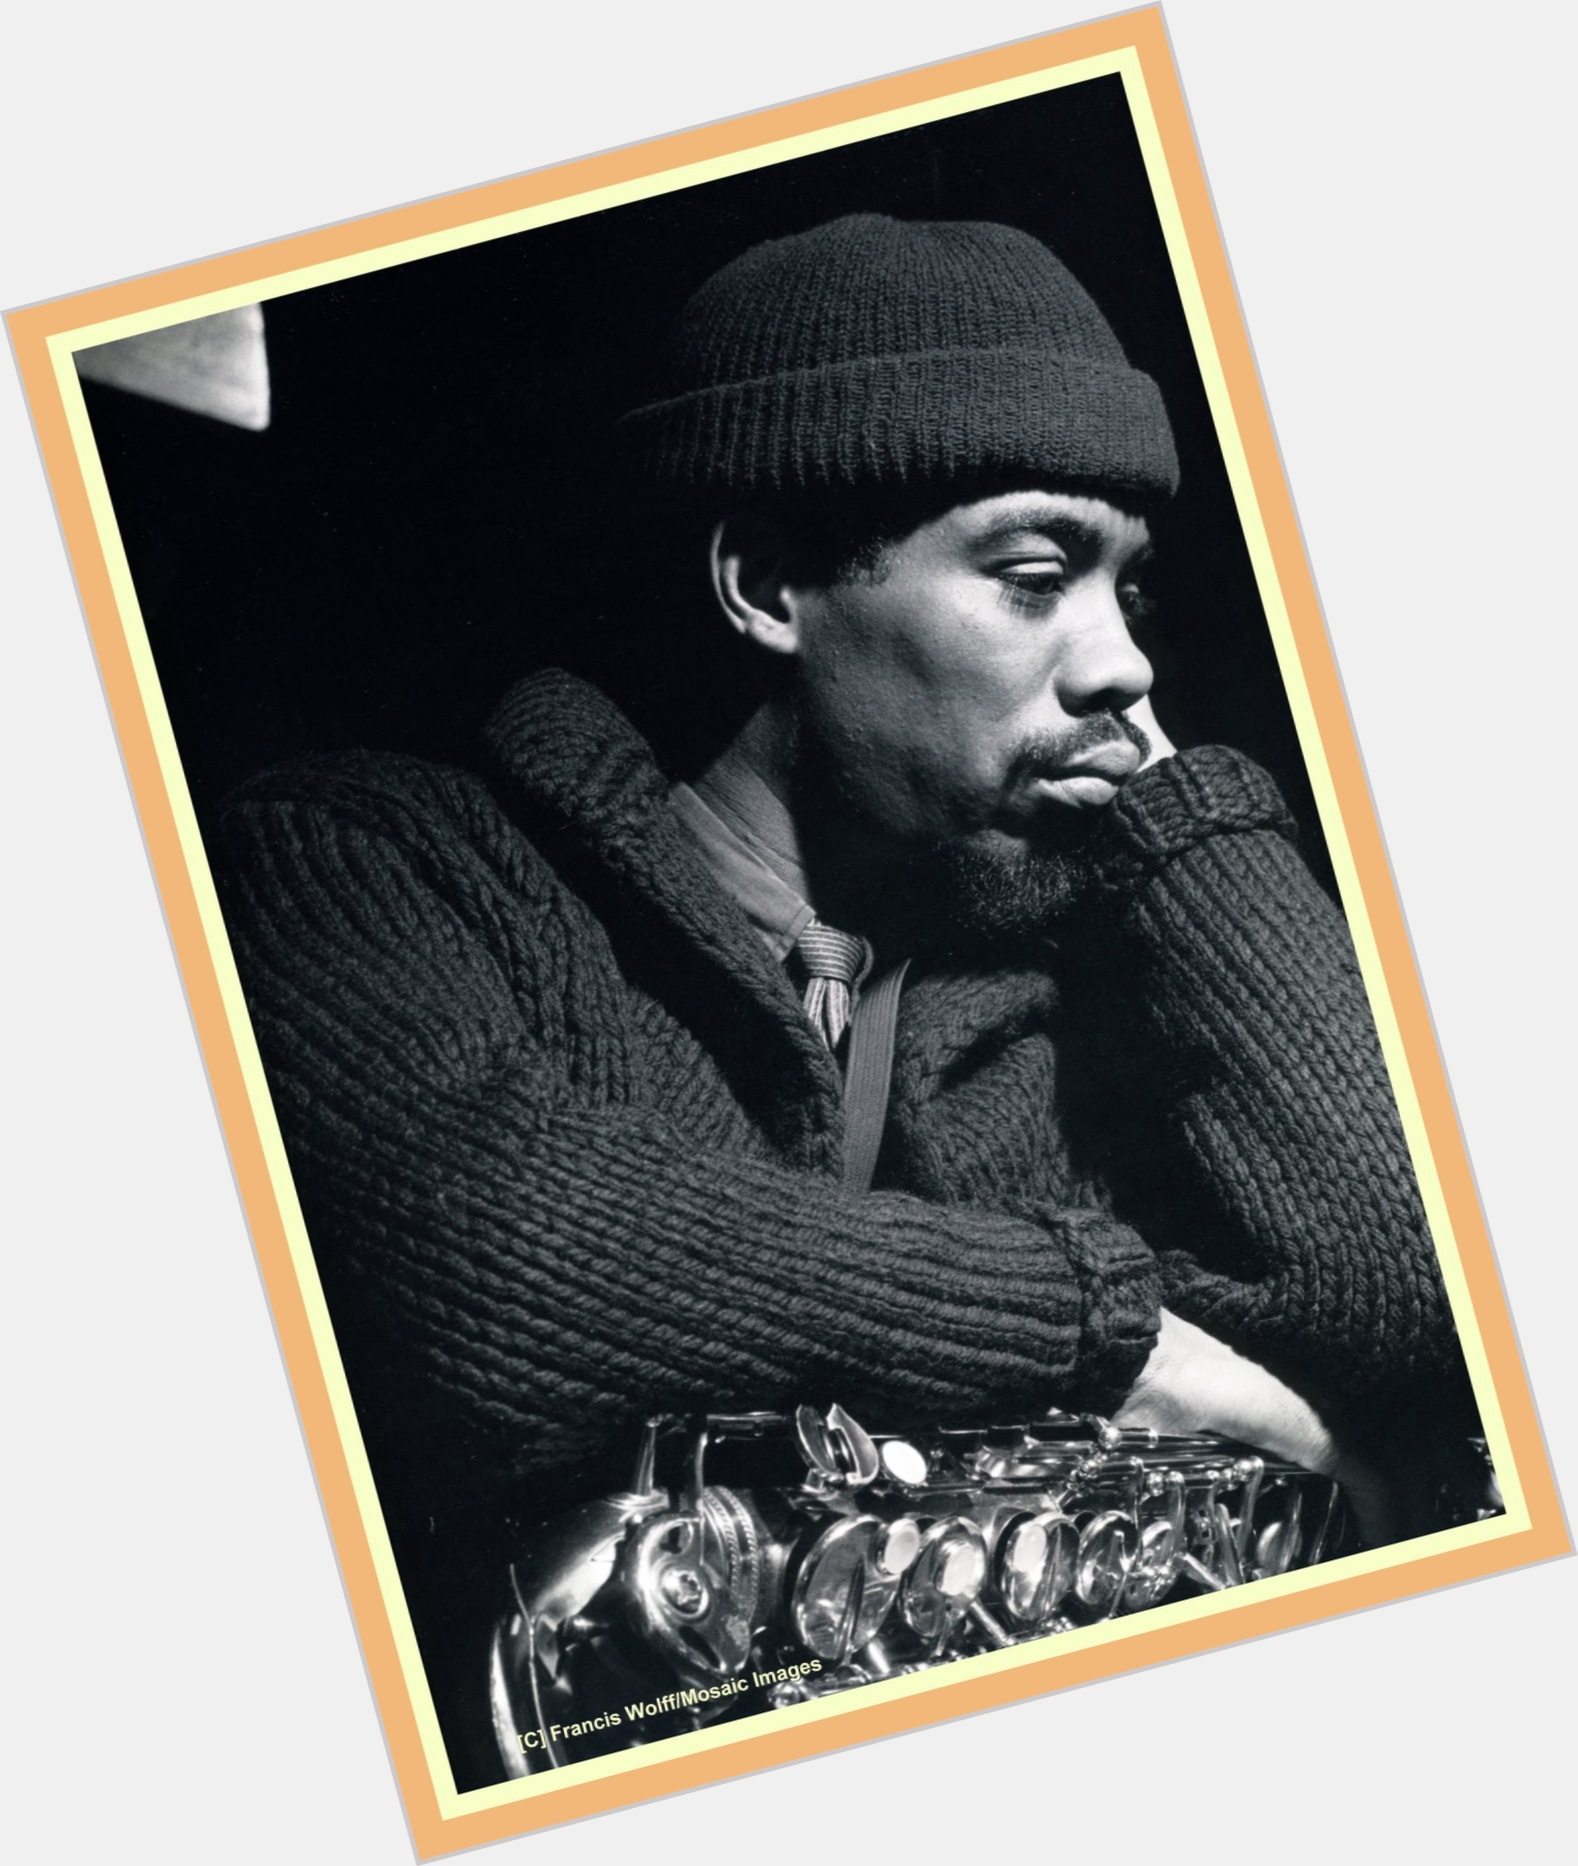 Eric Dolphy  black hair & hairstyles